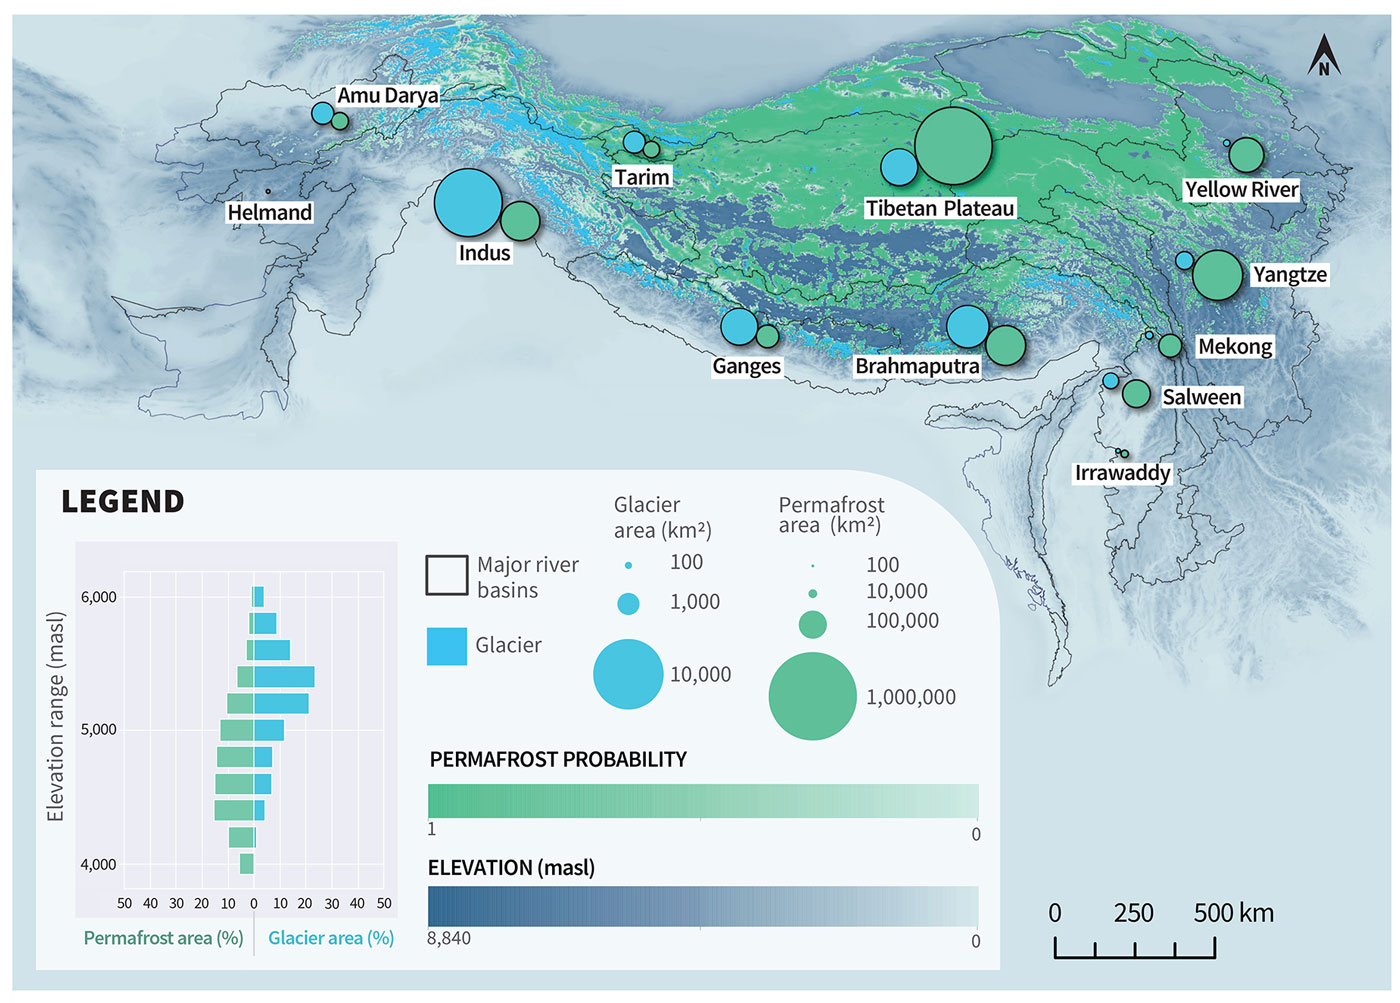 Distribution of permafrost (in green) and glaciers (in blue) and summary statistics for glaciers and permafrost in the major river basins of the HKH.